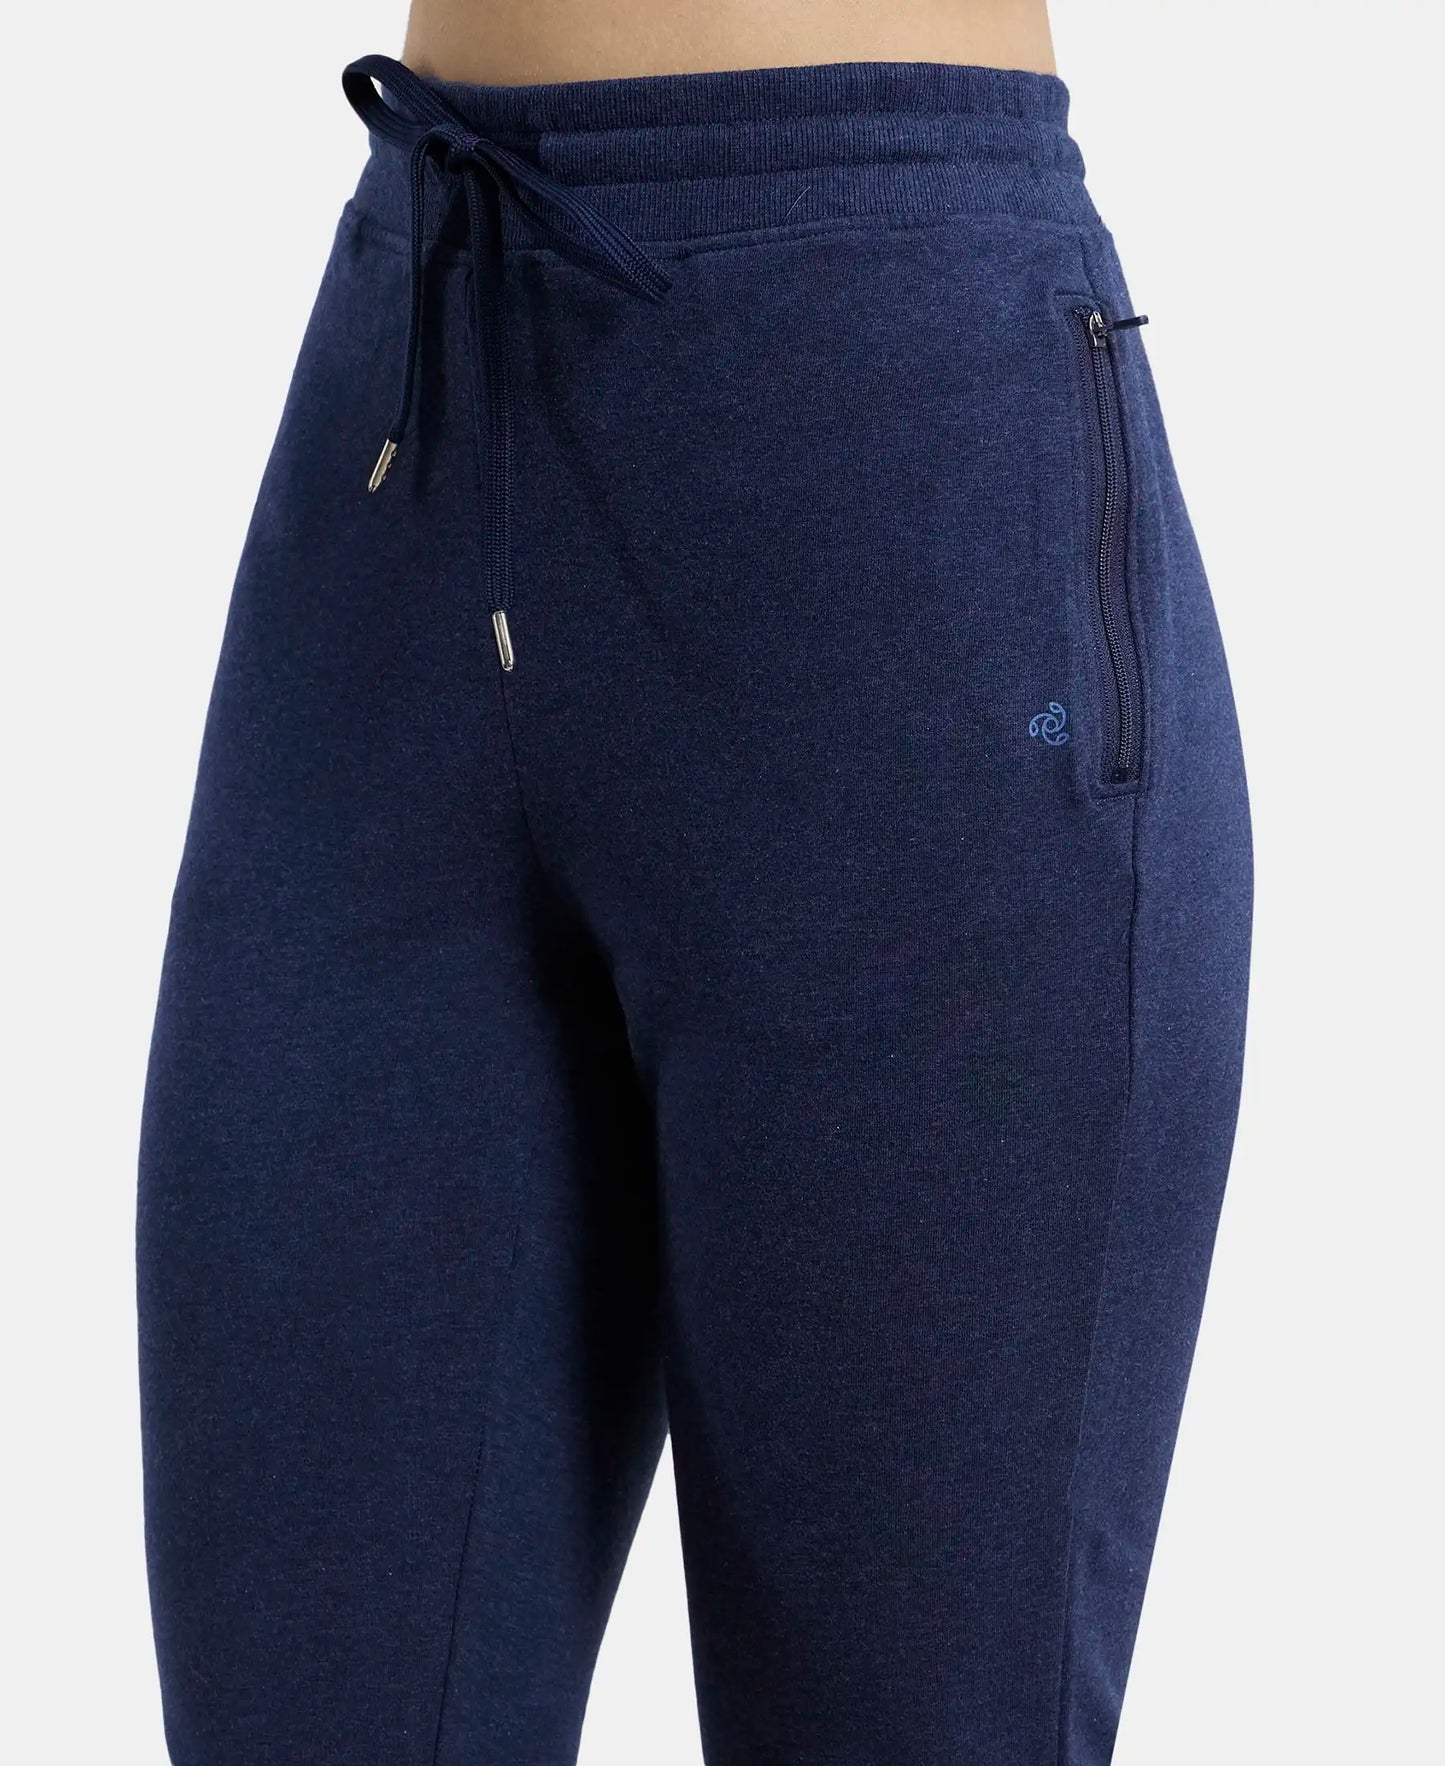 Super Combed Cotton Elastane French Terry Slim Fit Joggers With Zipper Pockets - Ink Blue Melange